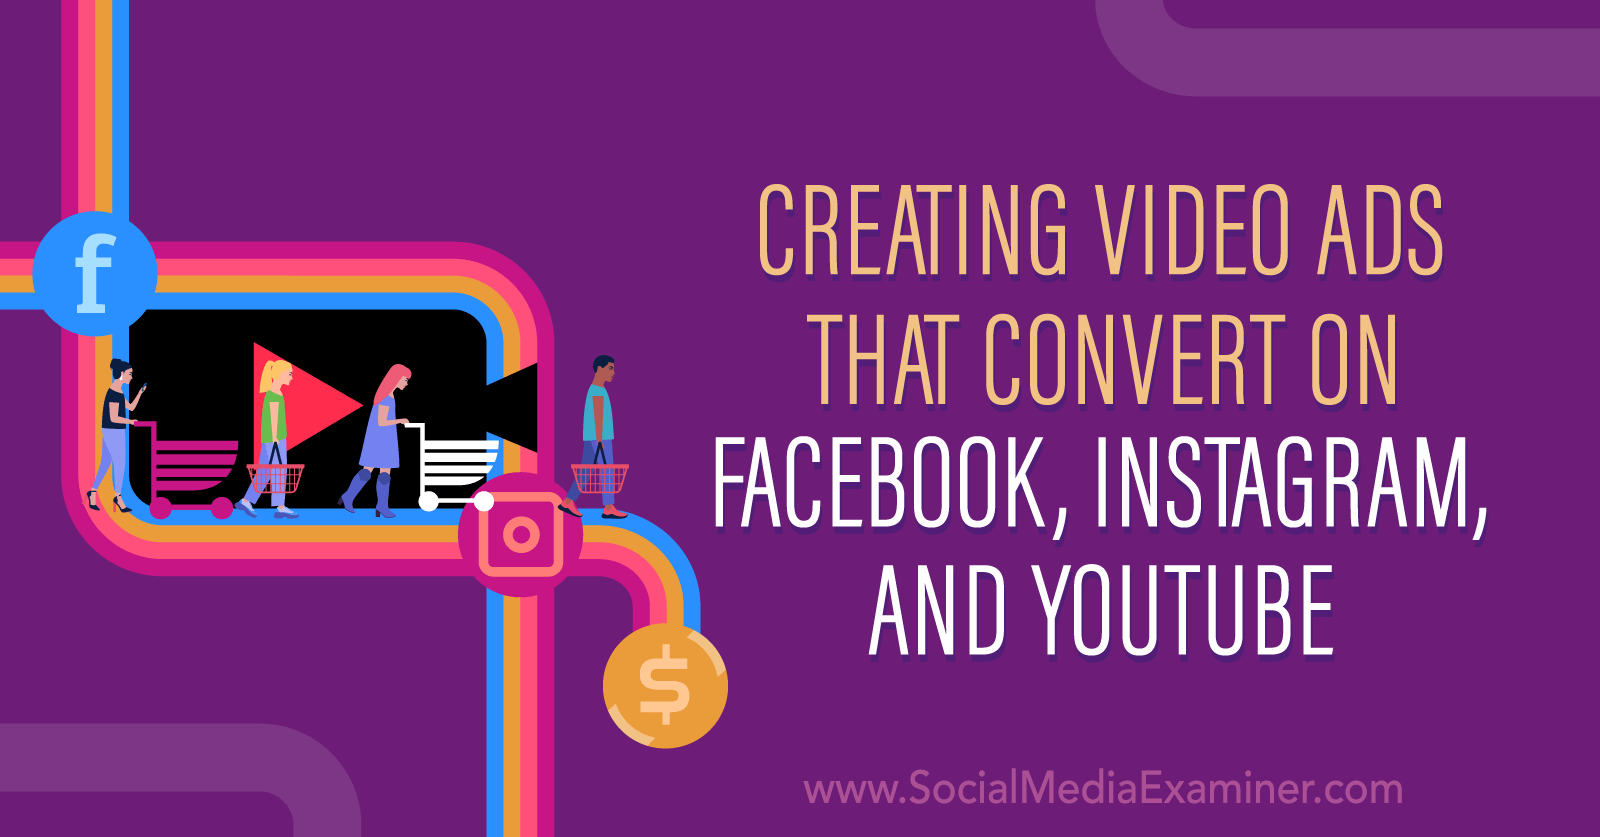 Creating Video Ads That Convert on Facebook, Instagram, and YouTube featuring insights from Matt Johnston on the Social Media Marketing Podcast.